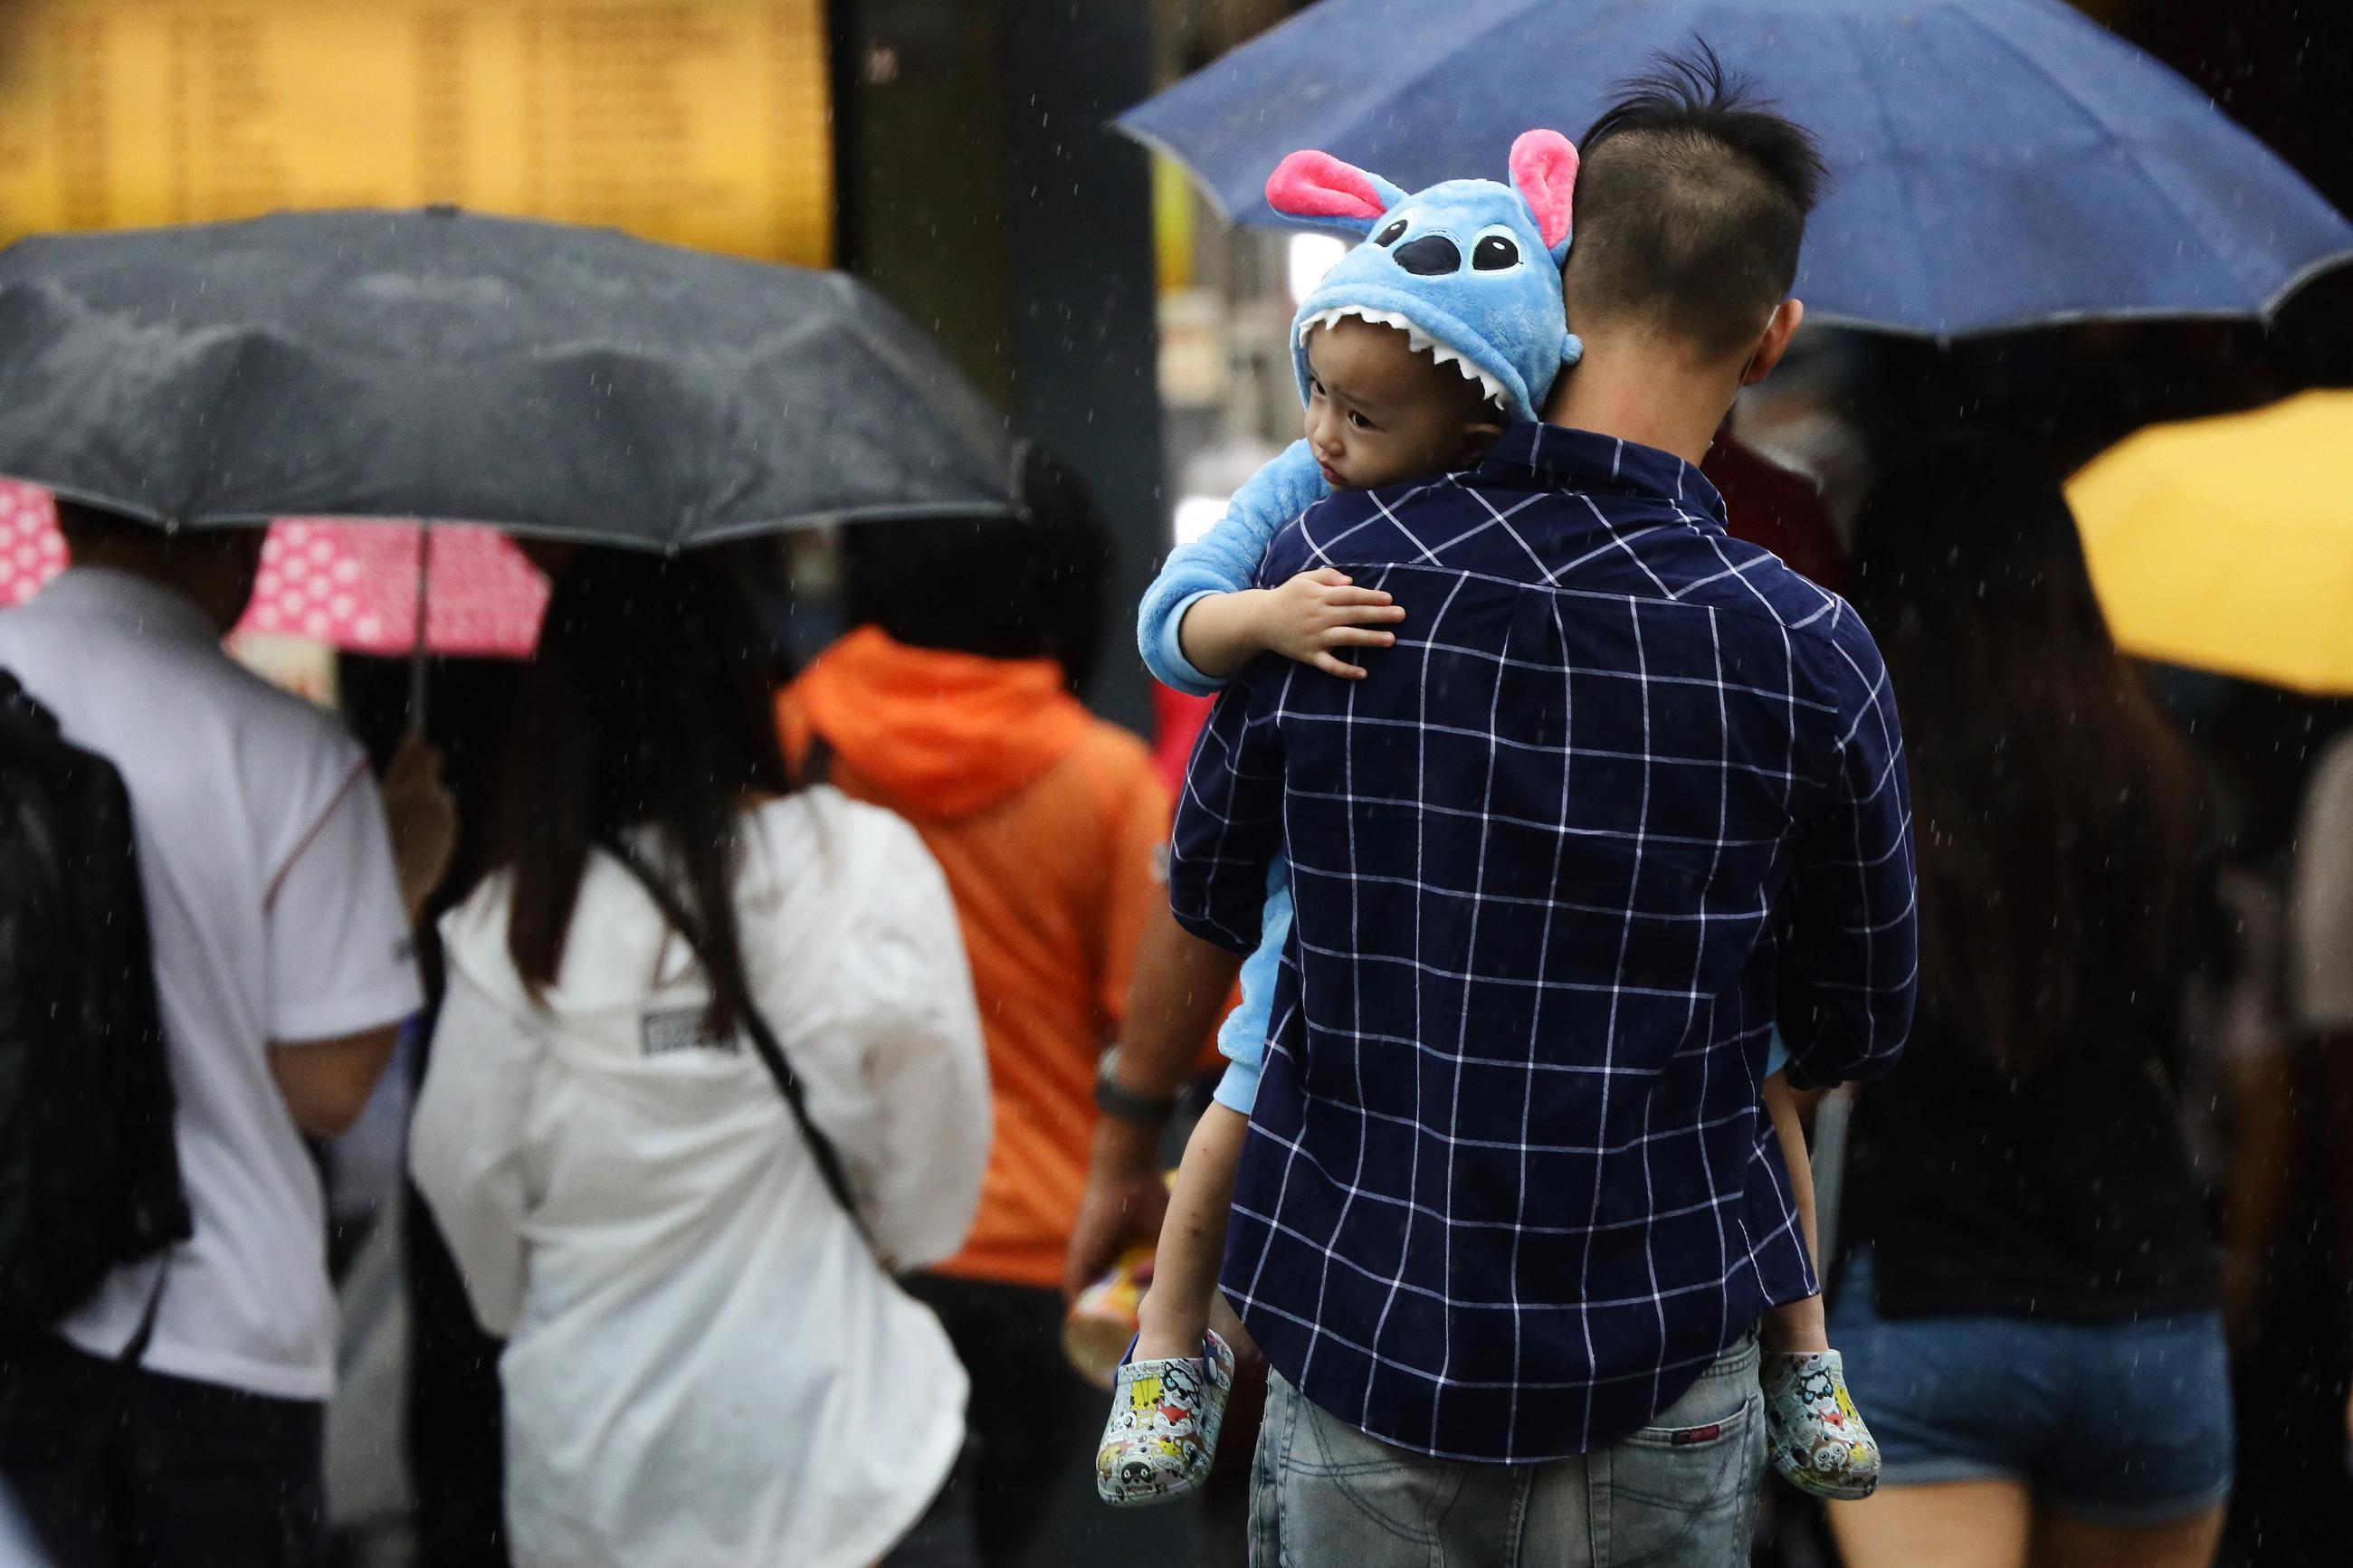  A parent carrying a child dressed in cartoon themed pajamas crosses a street in the rain in Singapore on January 10, 2021.